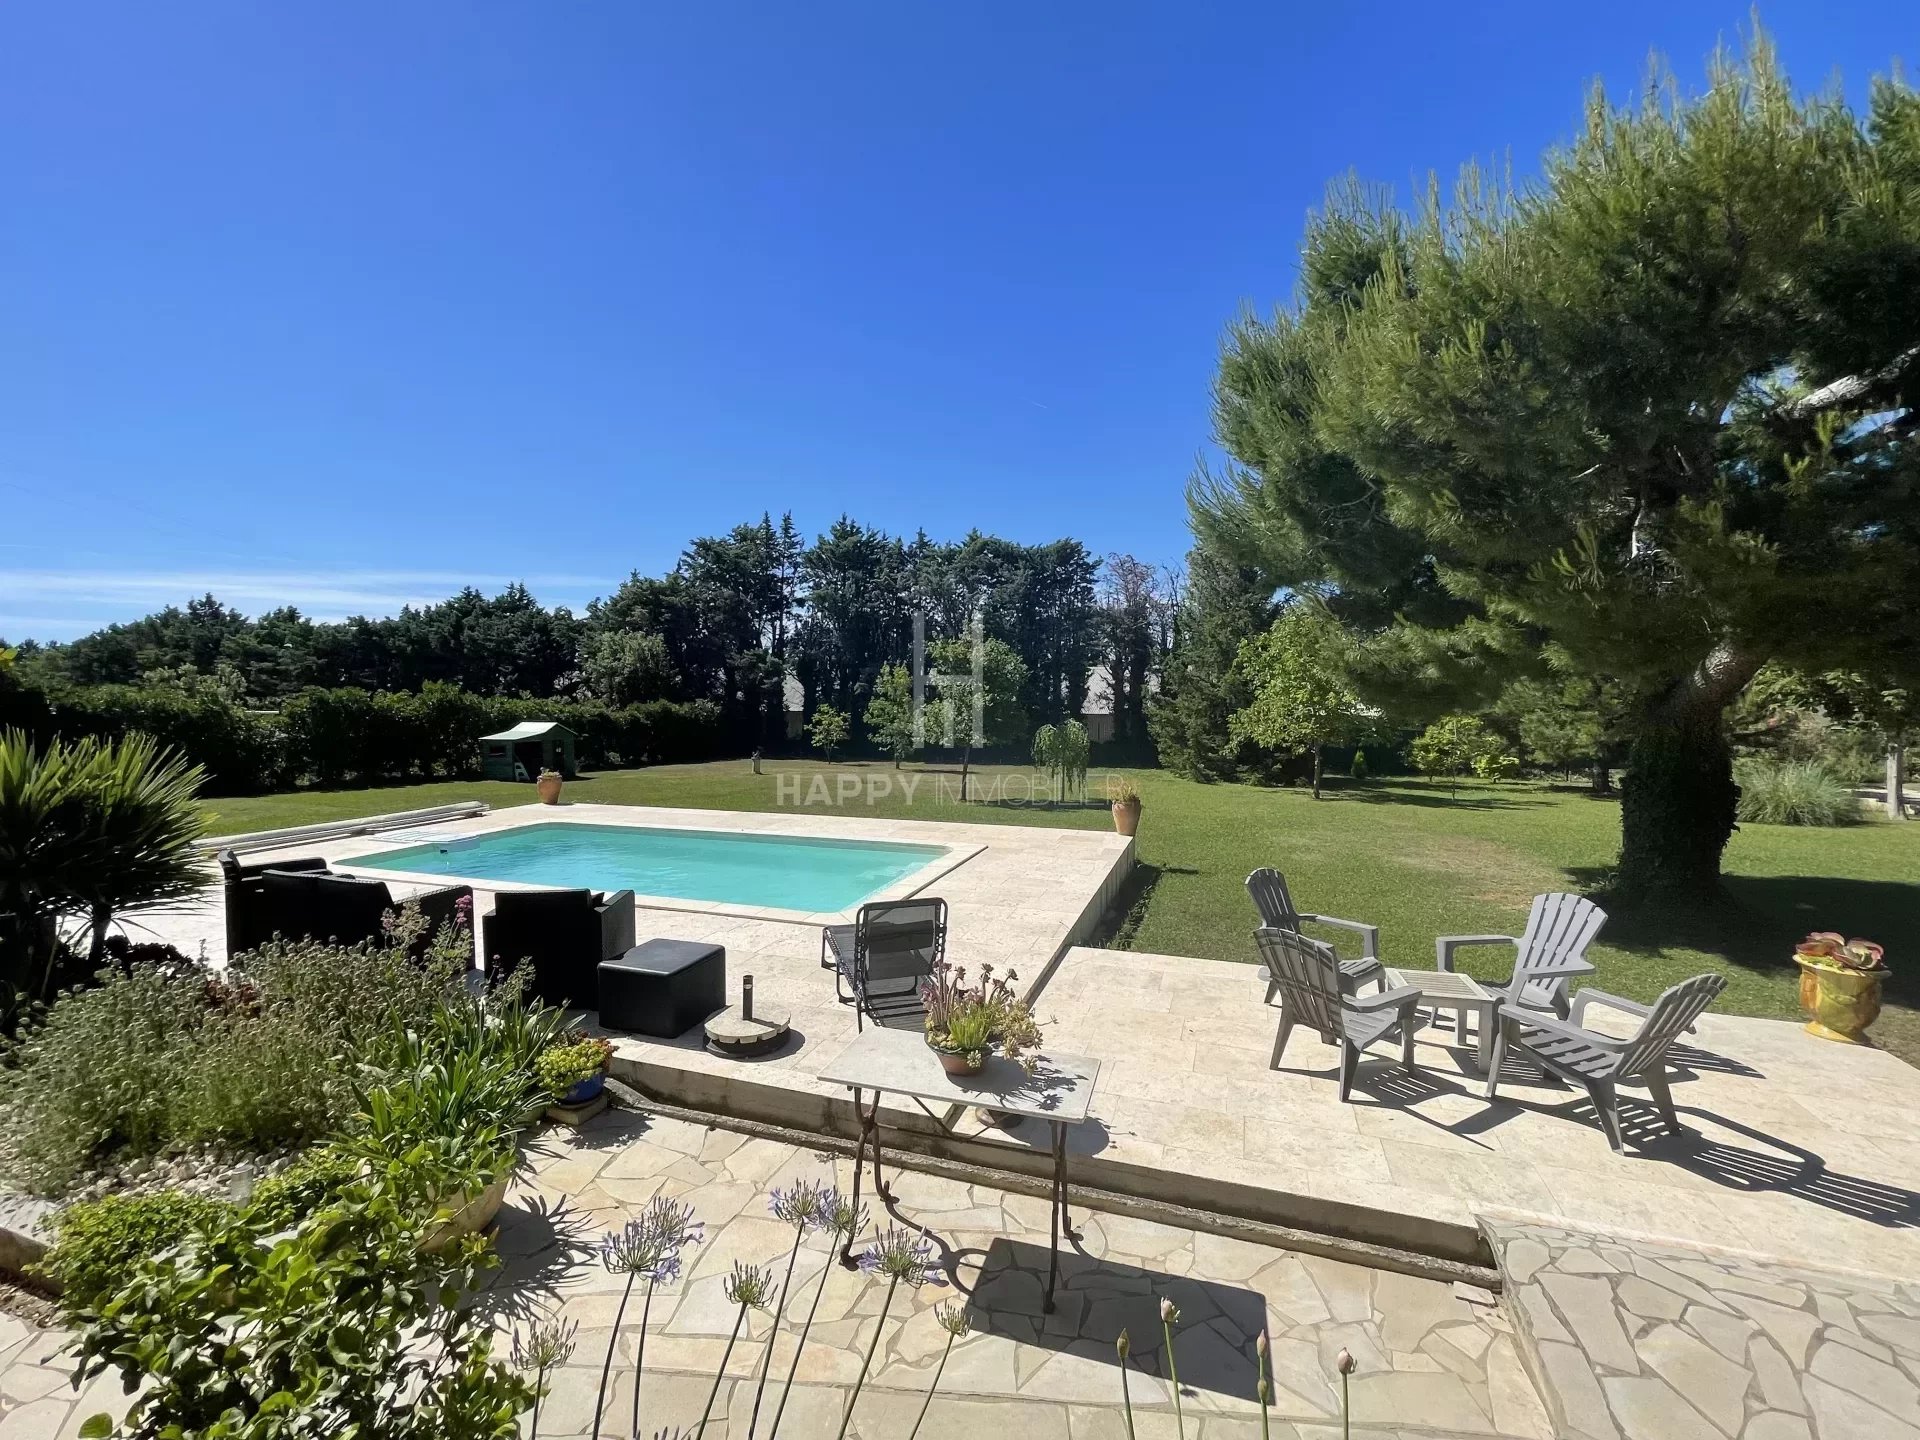 Family villa in the Mouriès countryside